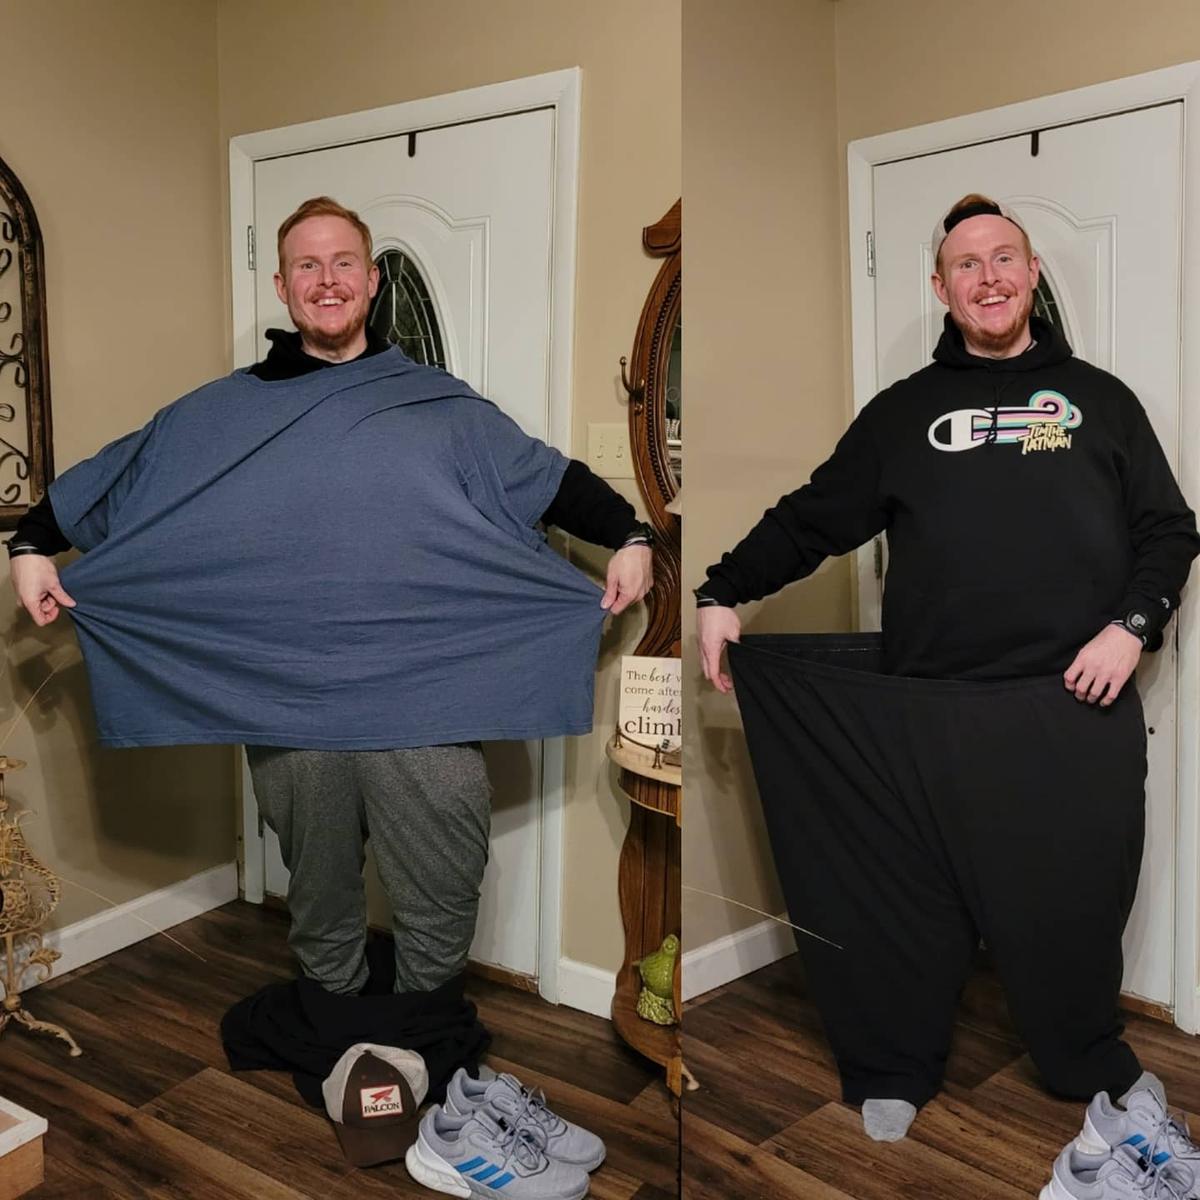 Casey King demonstrates his weight loss achievement by wearing his old clothes. (Courtesy of <a href="https://www.instagram.com/_caseyking_/">Casey King</a>)